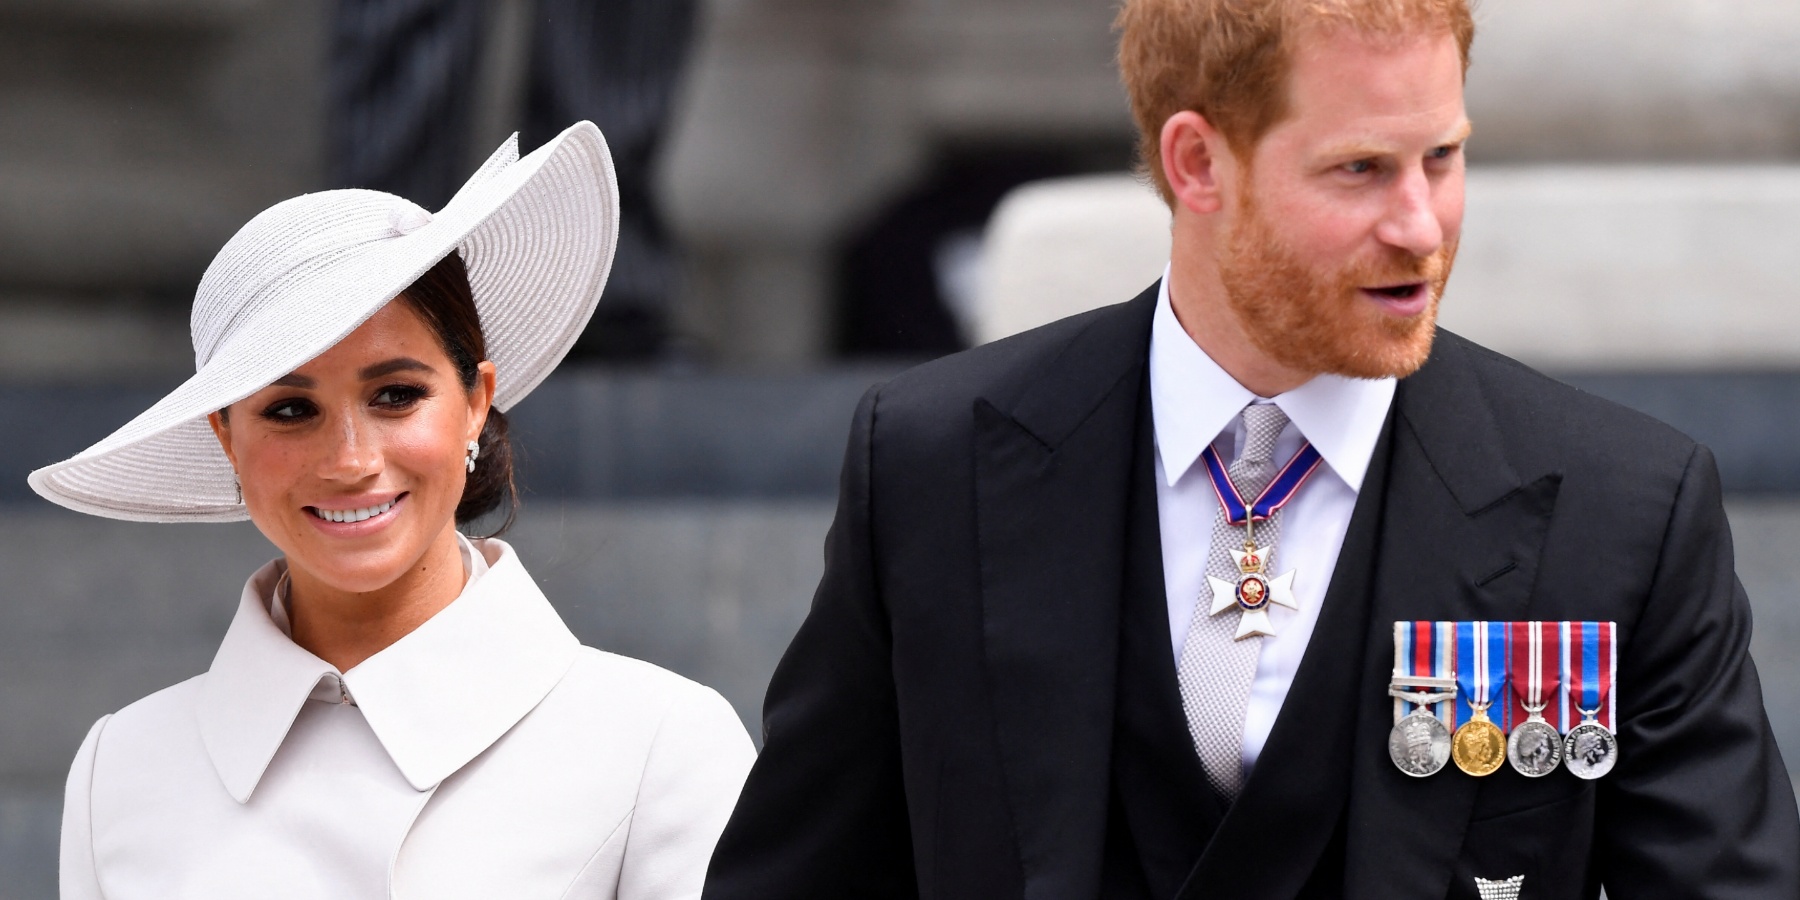 Meghan Markle and Prince Harry have launched a new website